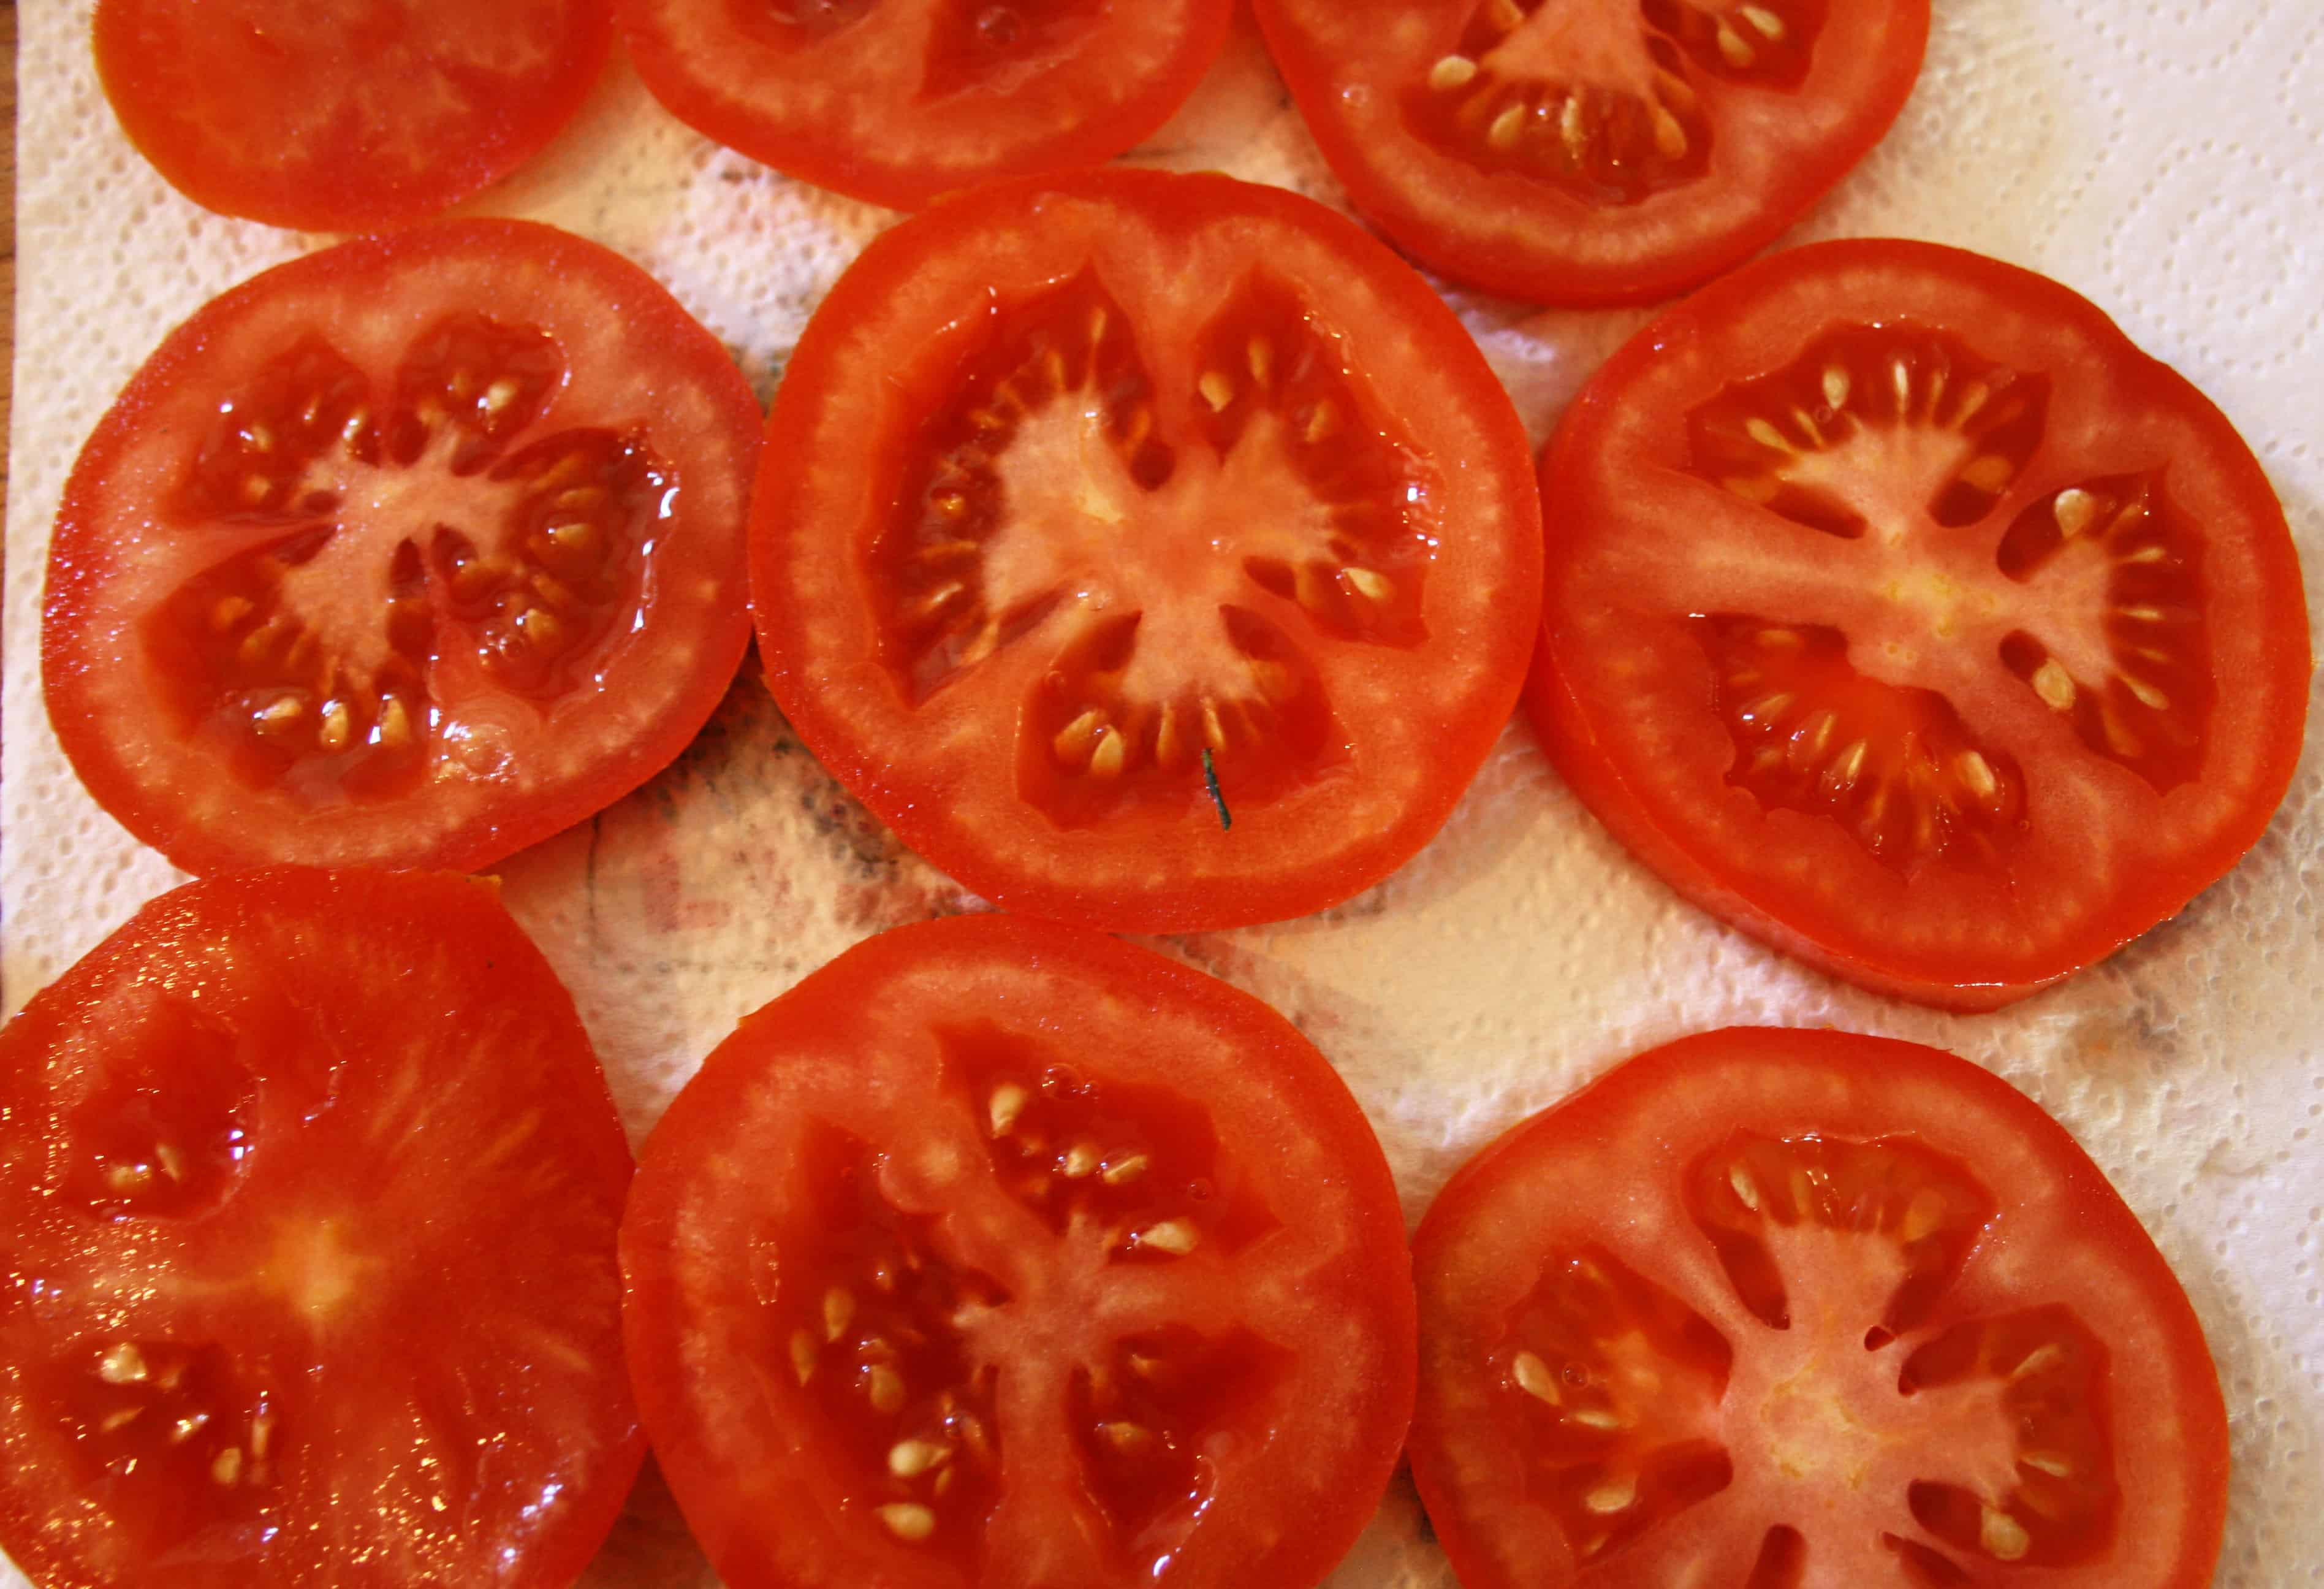 sliced tomatoes draining on kitchen towel.